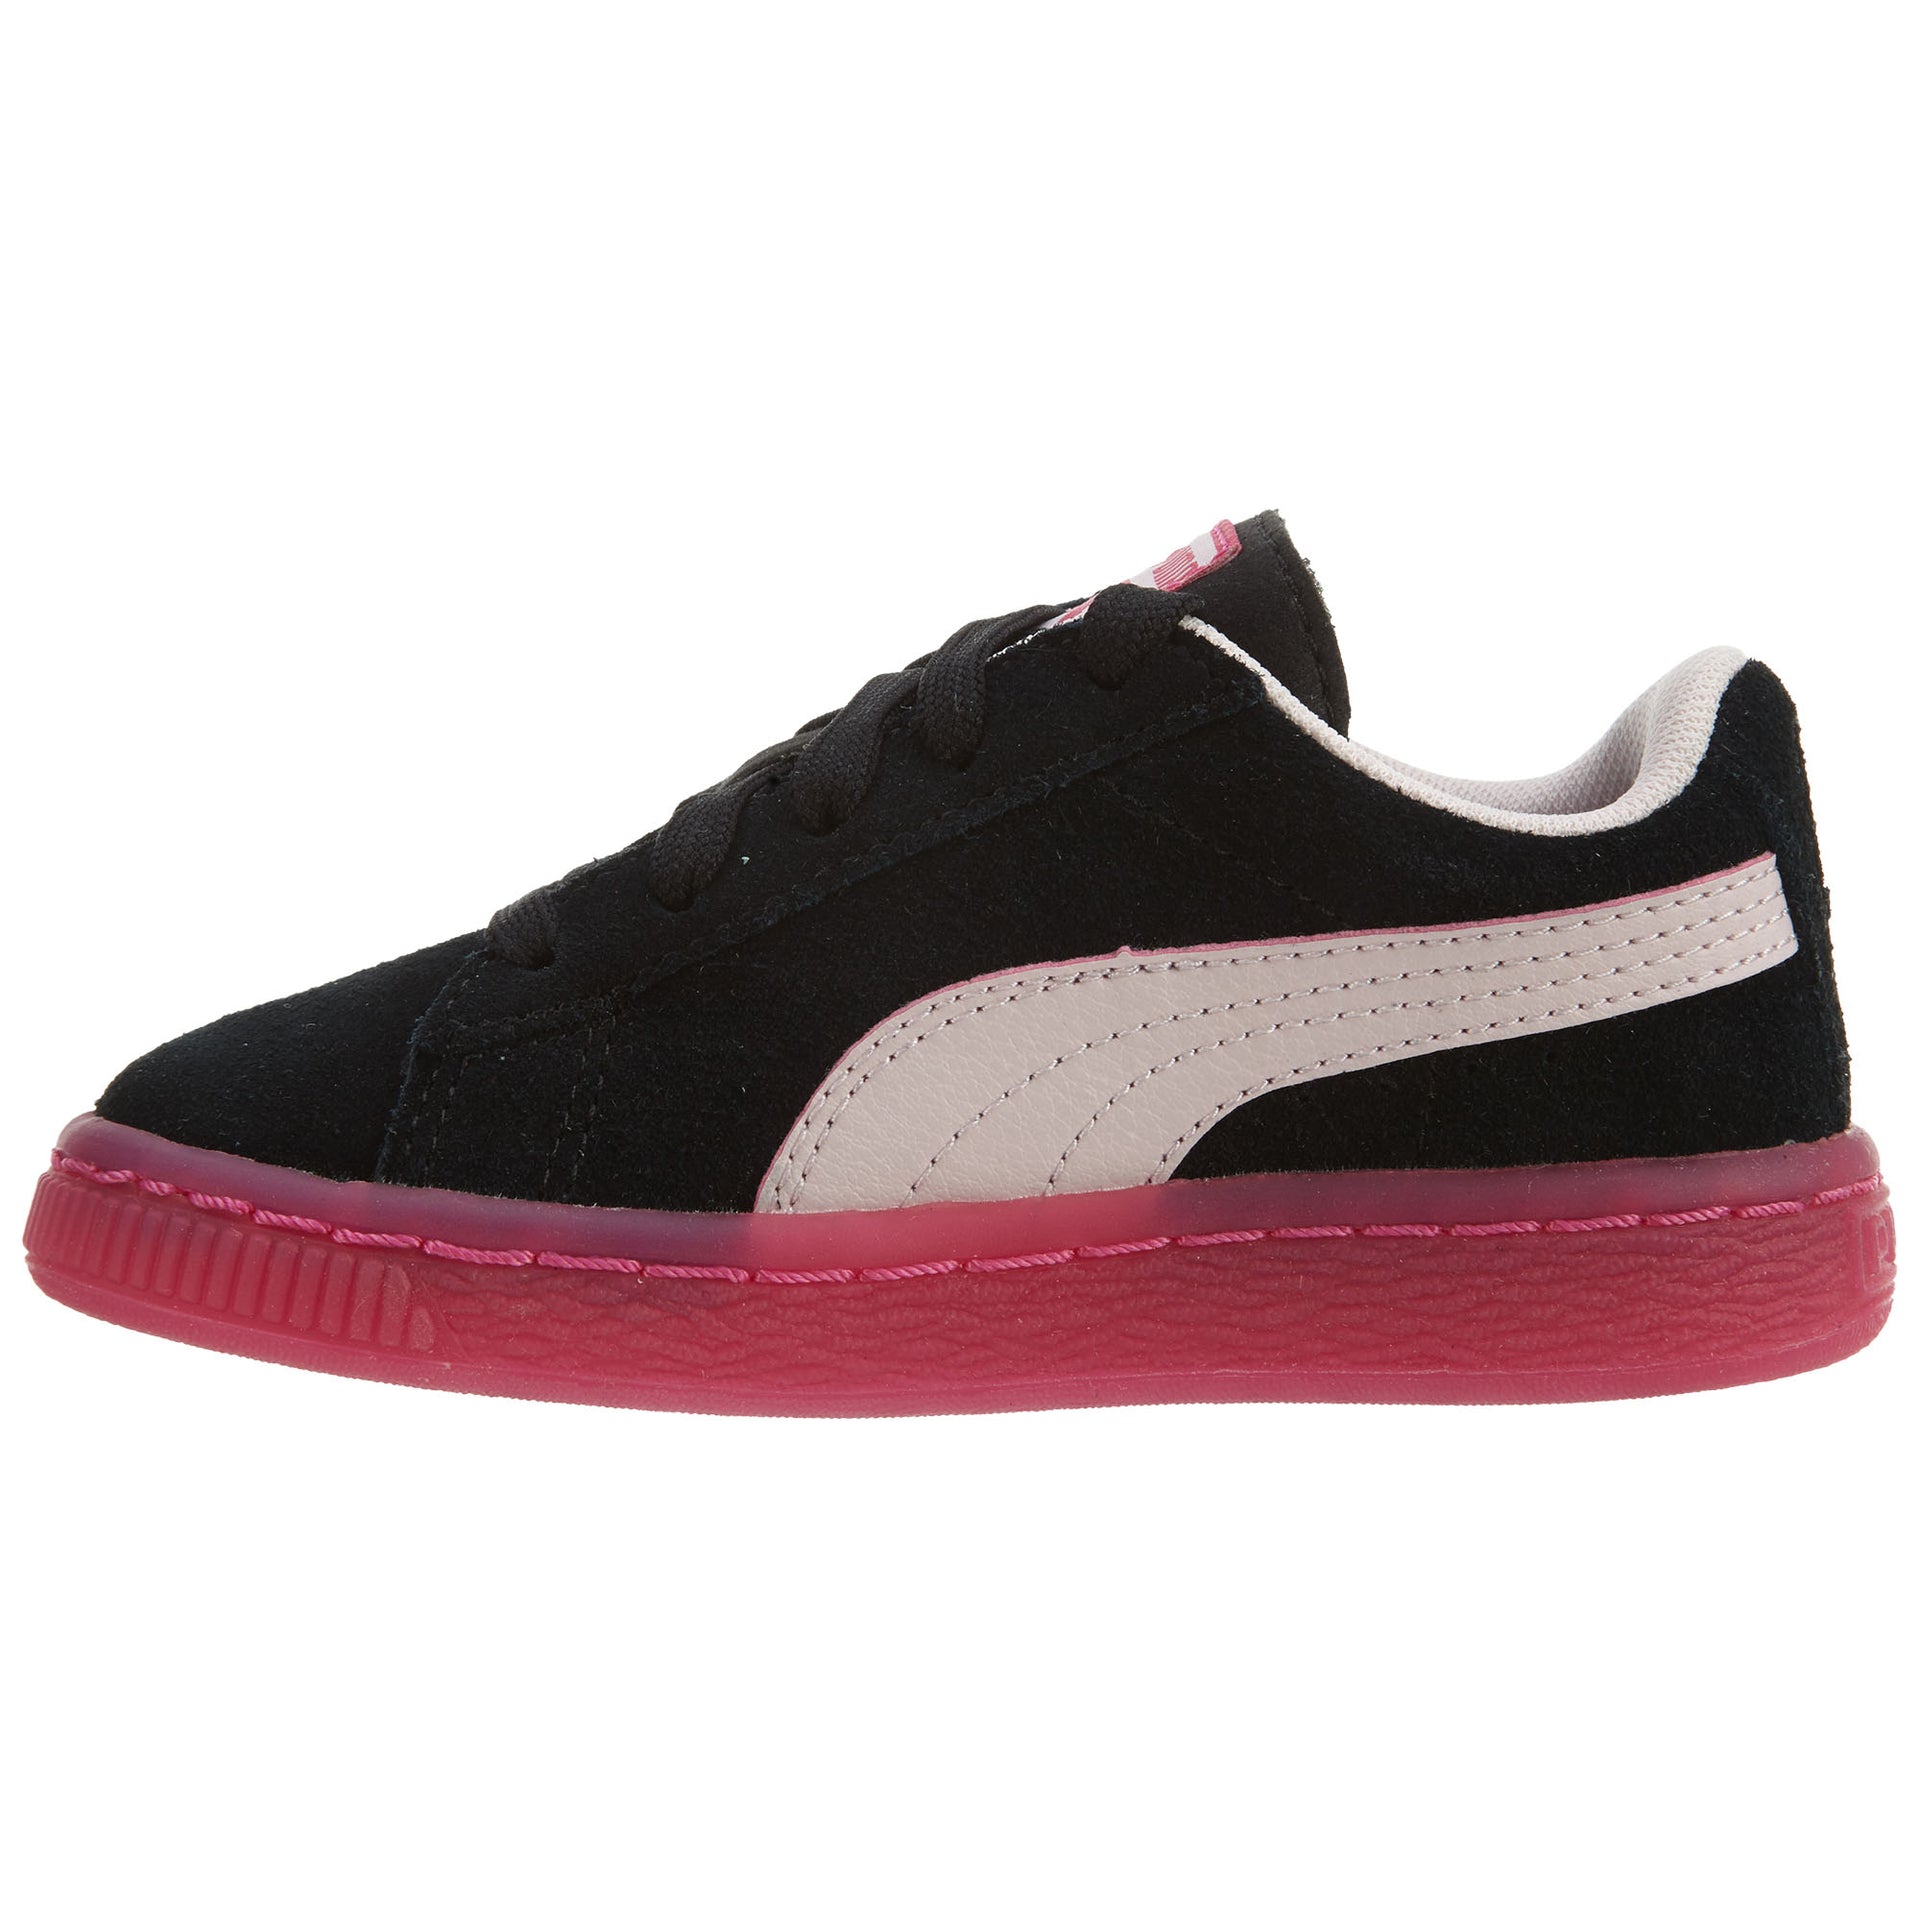 Puma Suede Lfs Iced Inf Toddlers Style : 363085